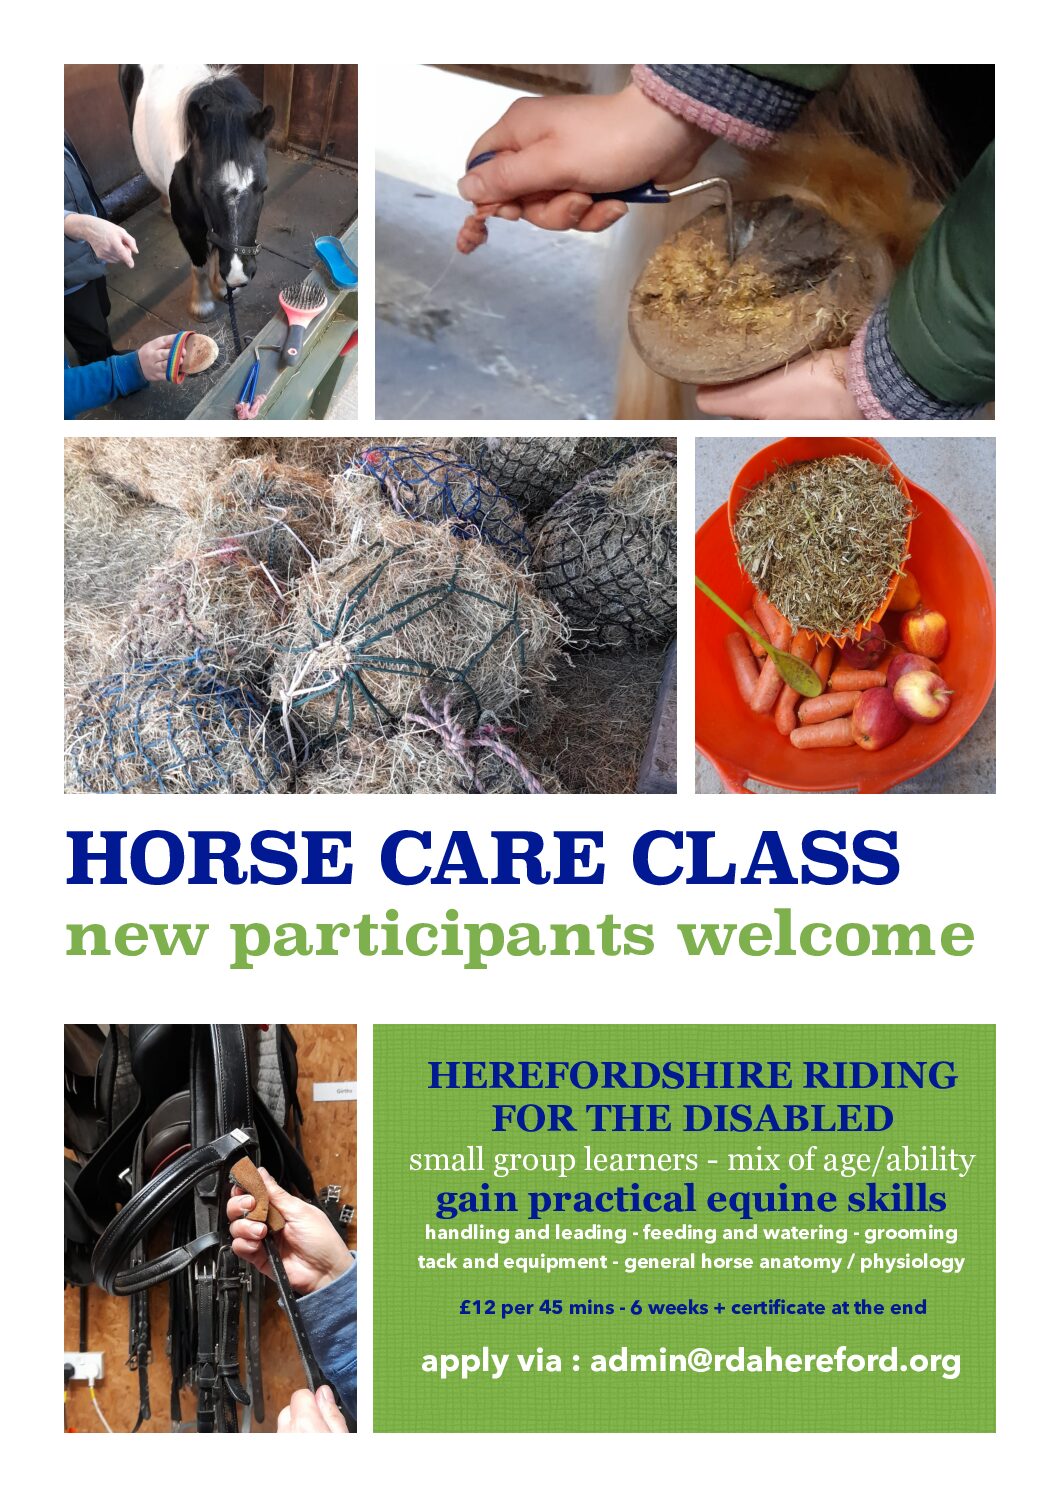 Horse Care classes are starting!